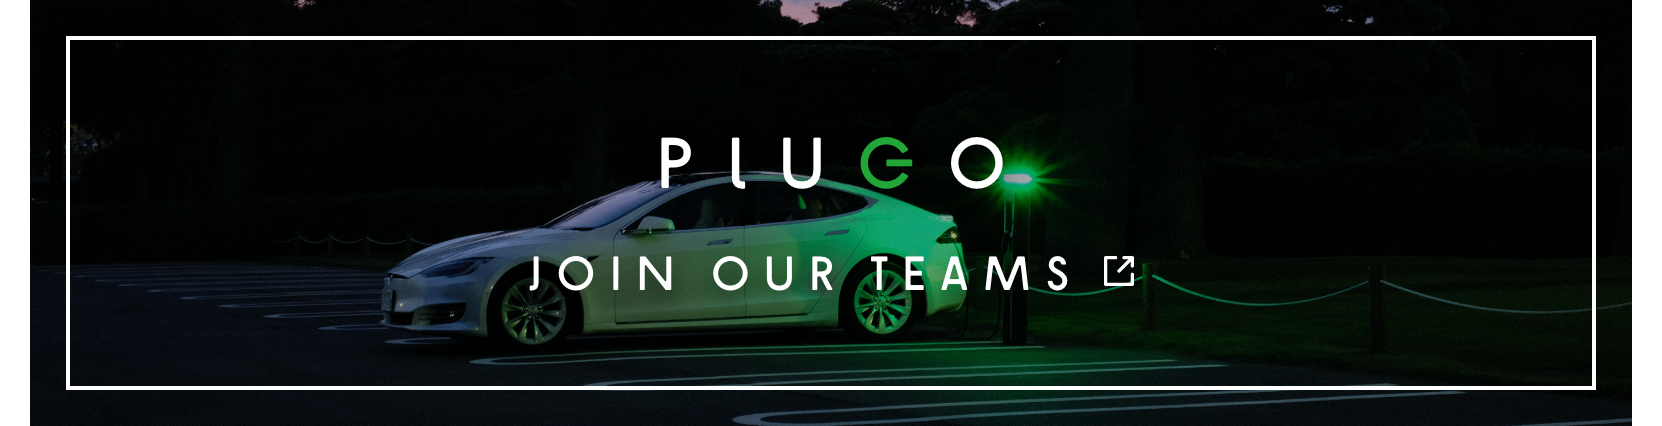 PLUGO JOIN OUR TEAMS